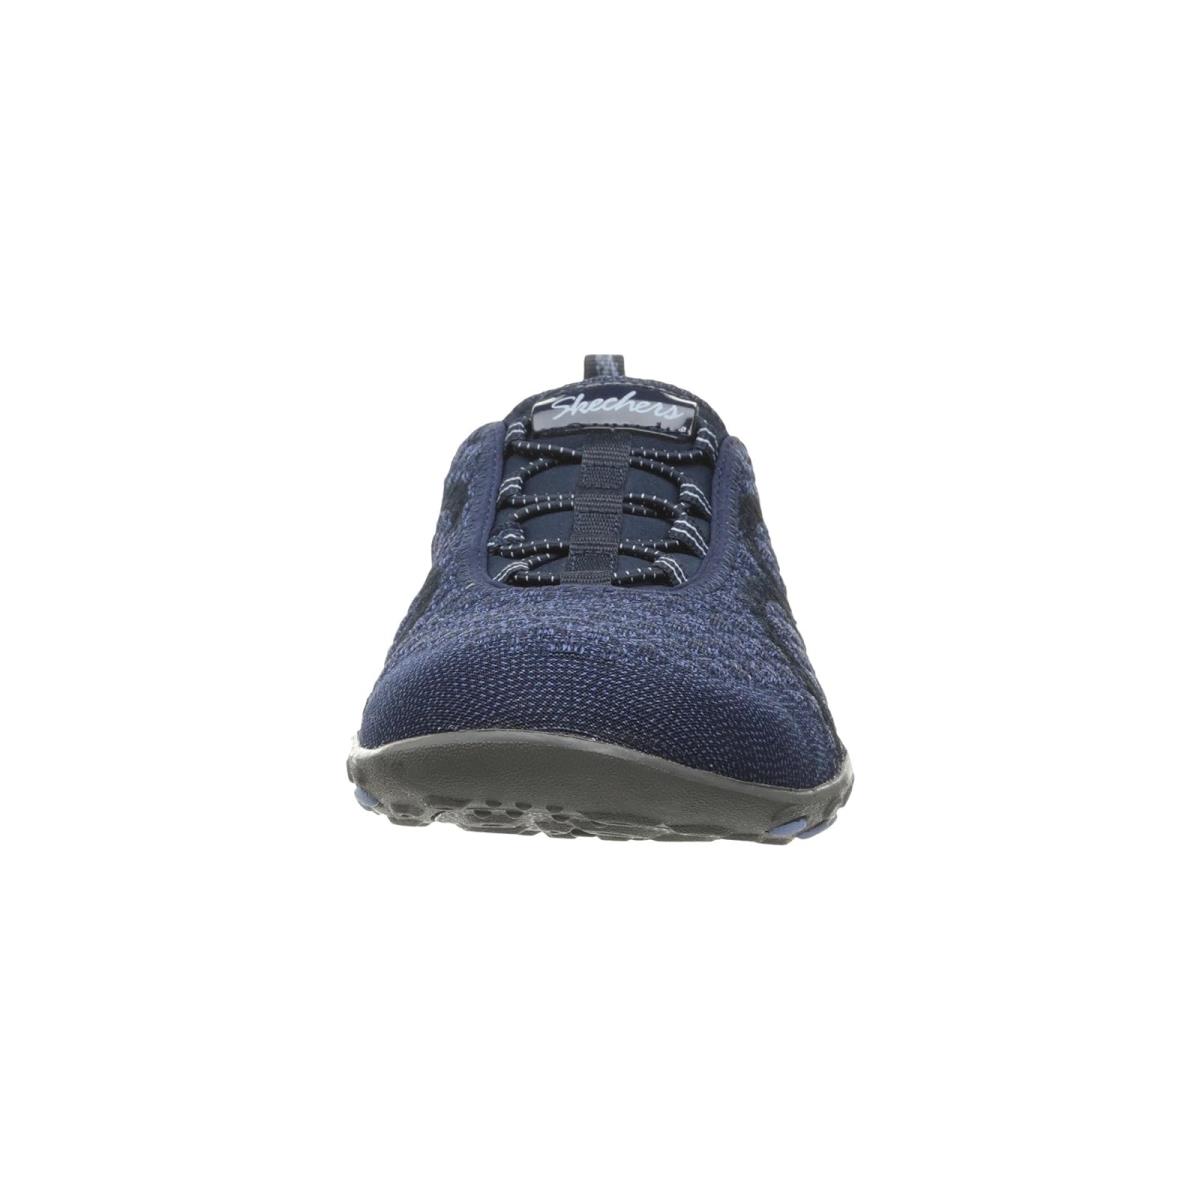 Woman`s Sneakers Athletic Shoes Skechers Breathe-easy - Fortuneknit Navy